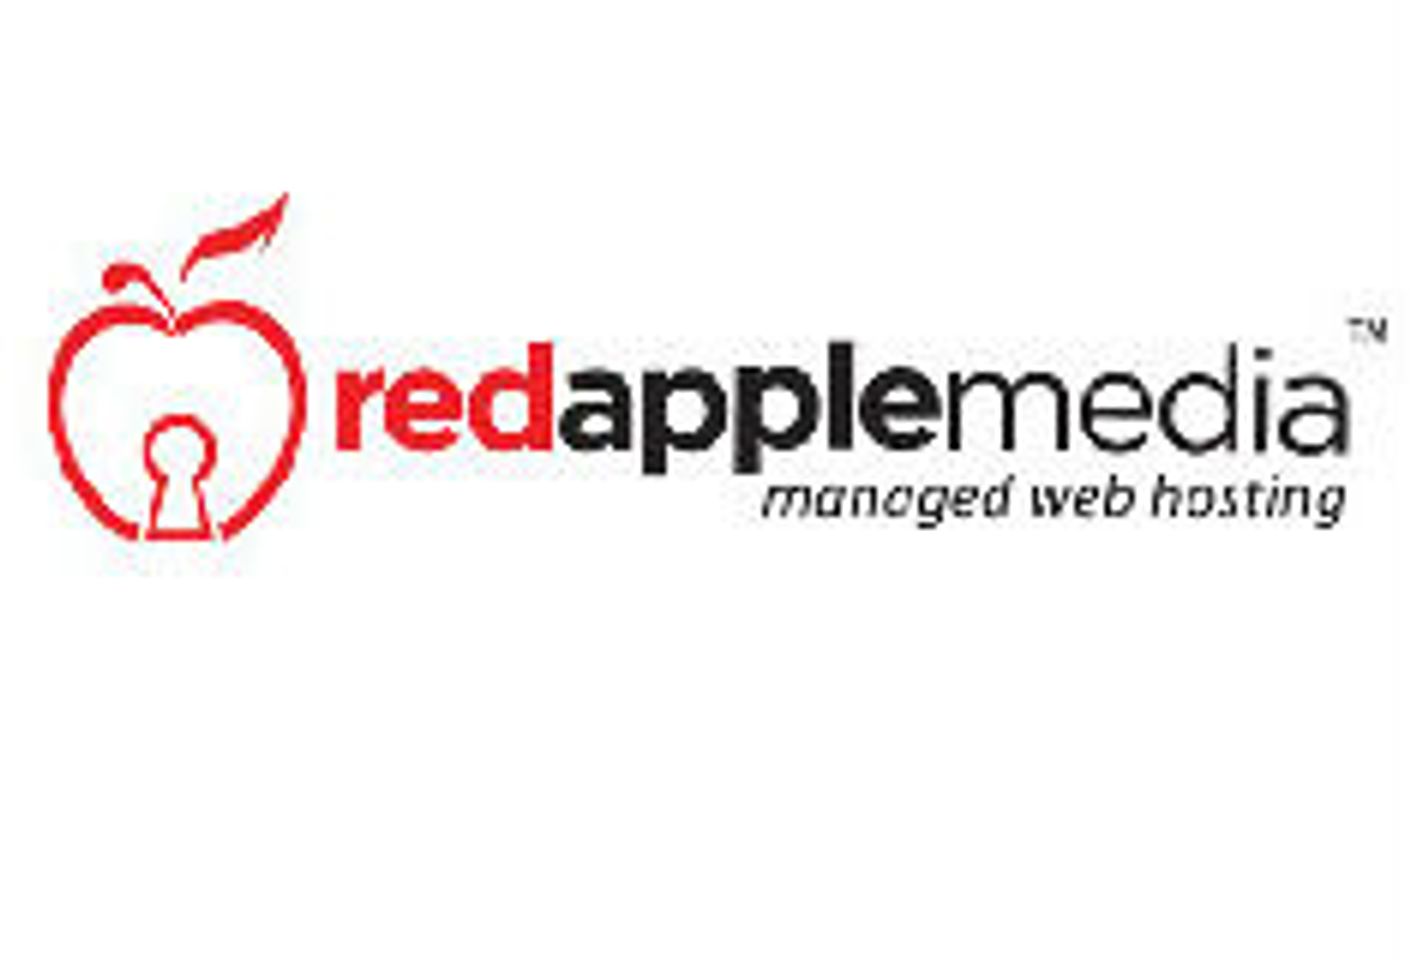 Red Apple Media Redesigns Website with New, Improved Gateway